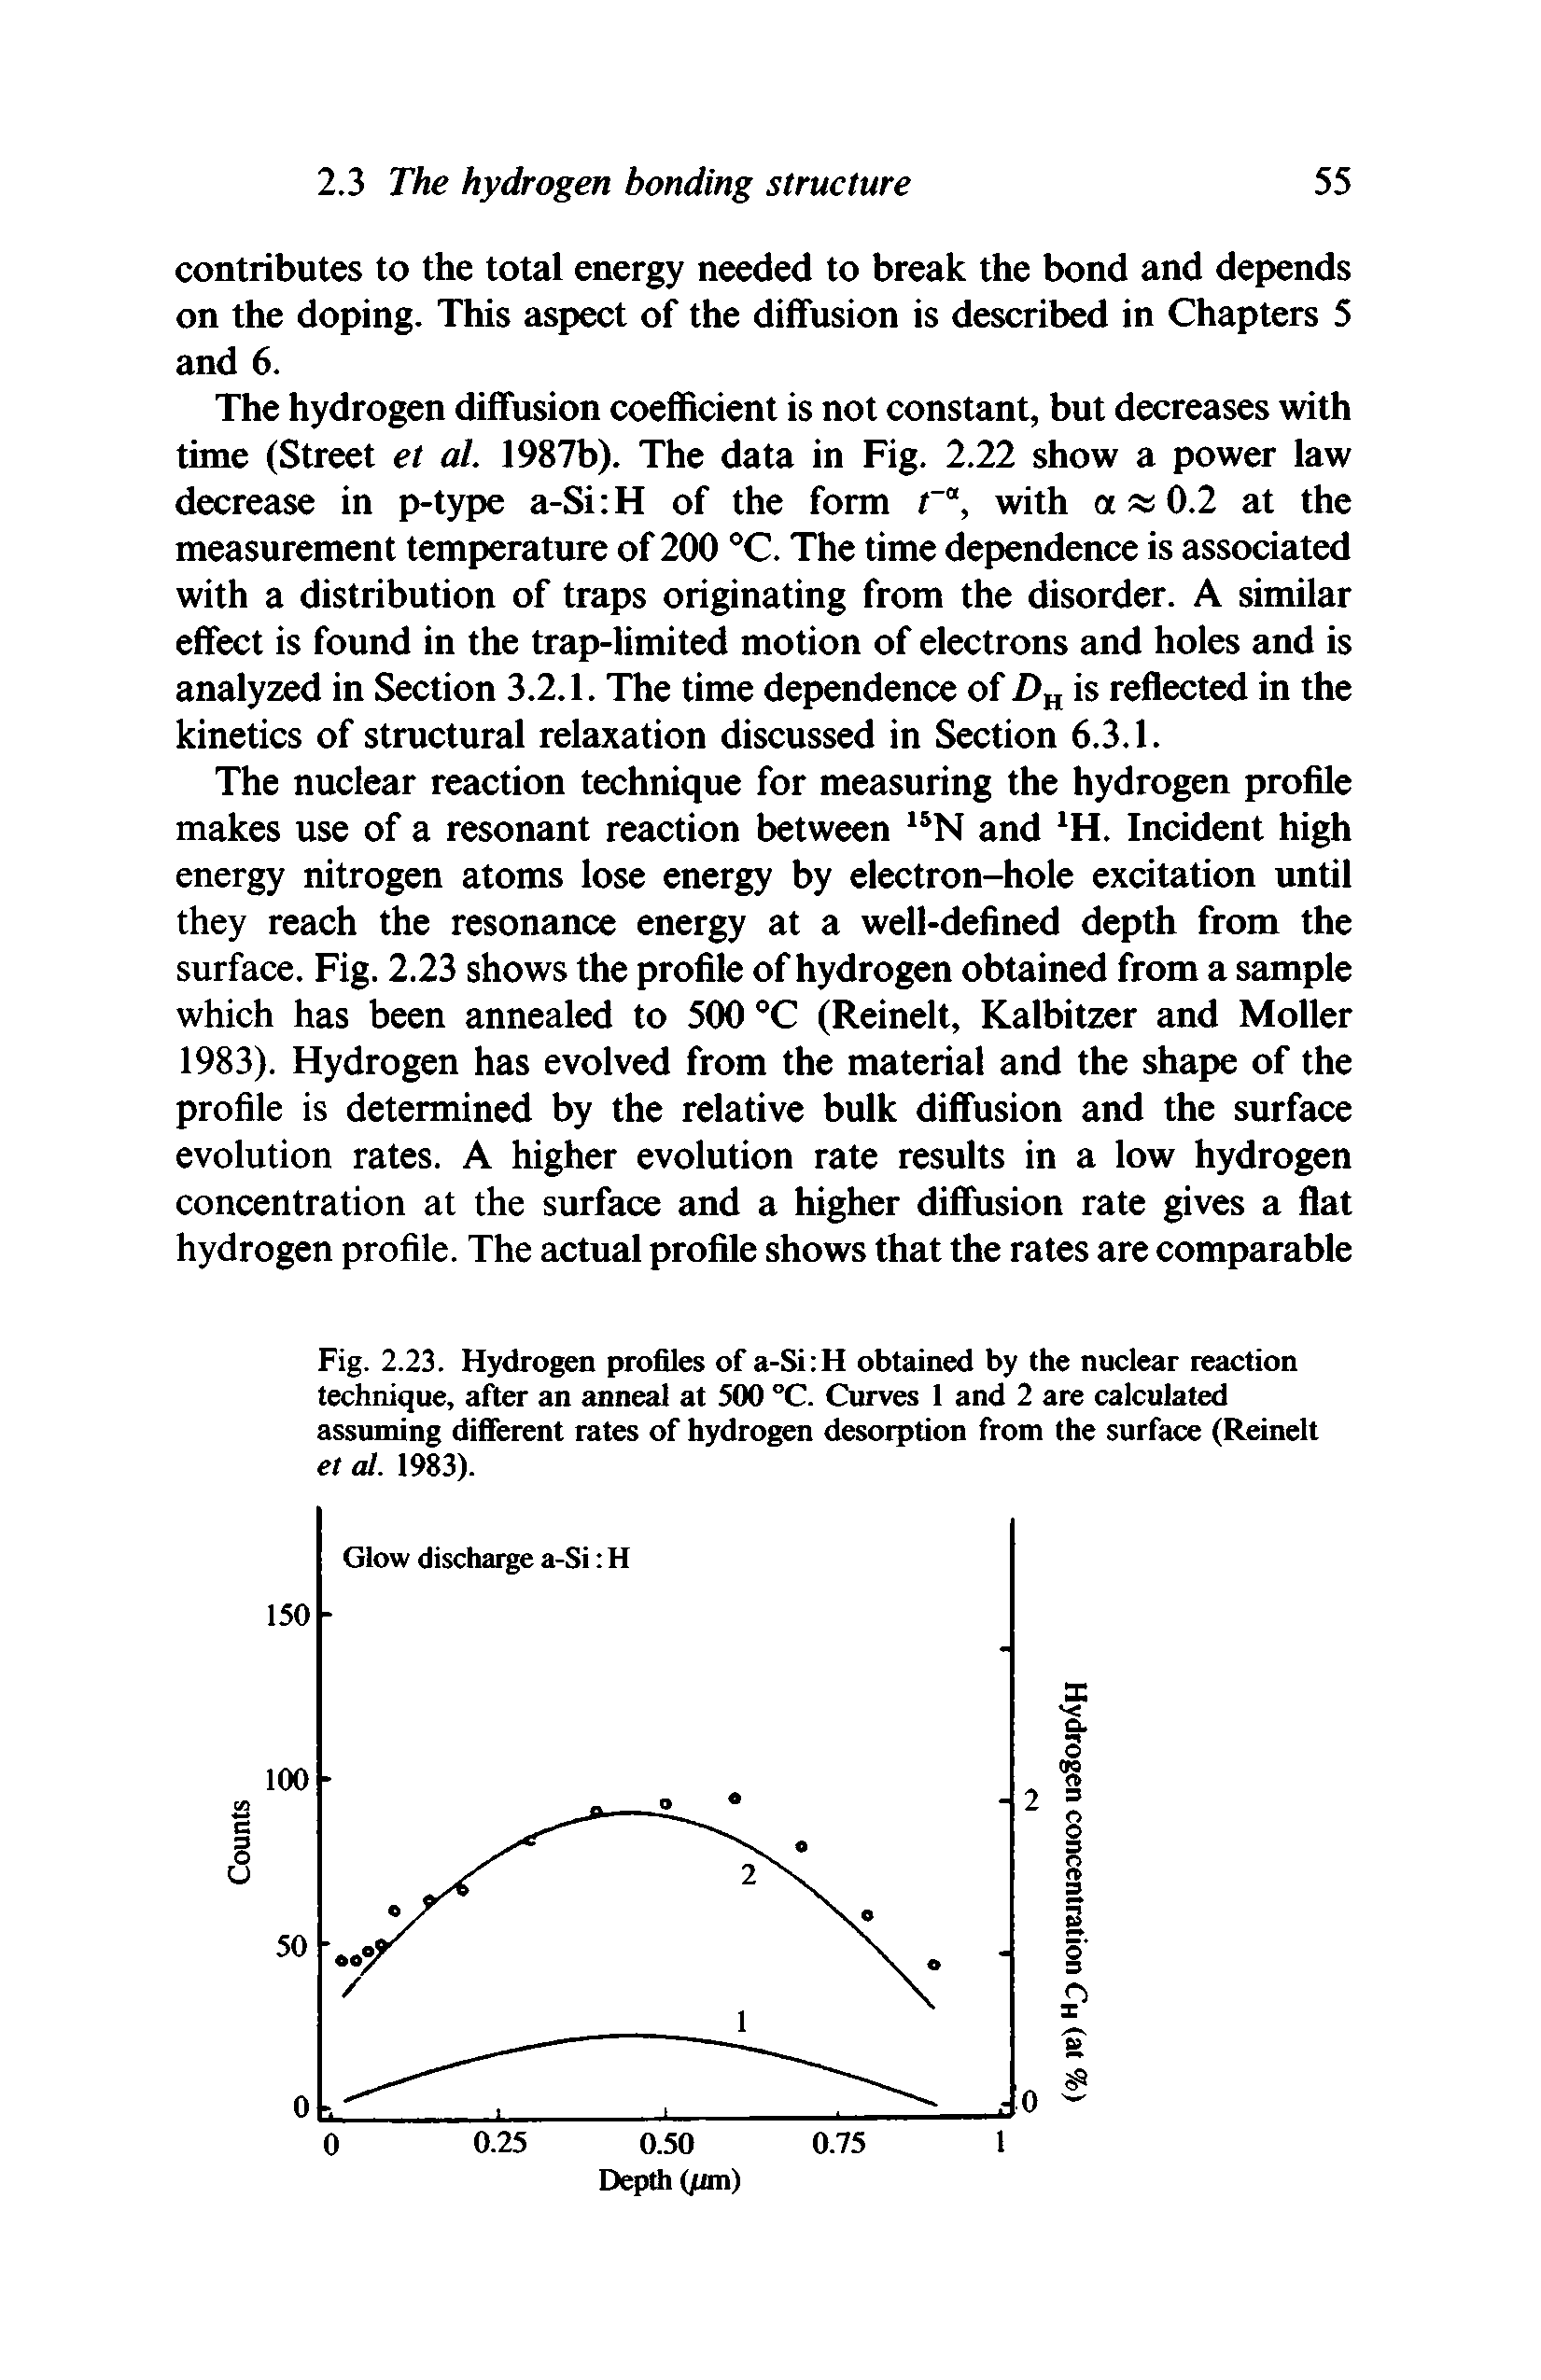 Fig. 2.23. Hydrogen profiles of a-Si H obtained by the nuclear reaction technique, after an anneal at SOO °C. Curves 1 and 2 are calculated assuming different rates of hydrogen desorption from the surface (Reinelt et al. 1983).